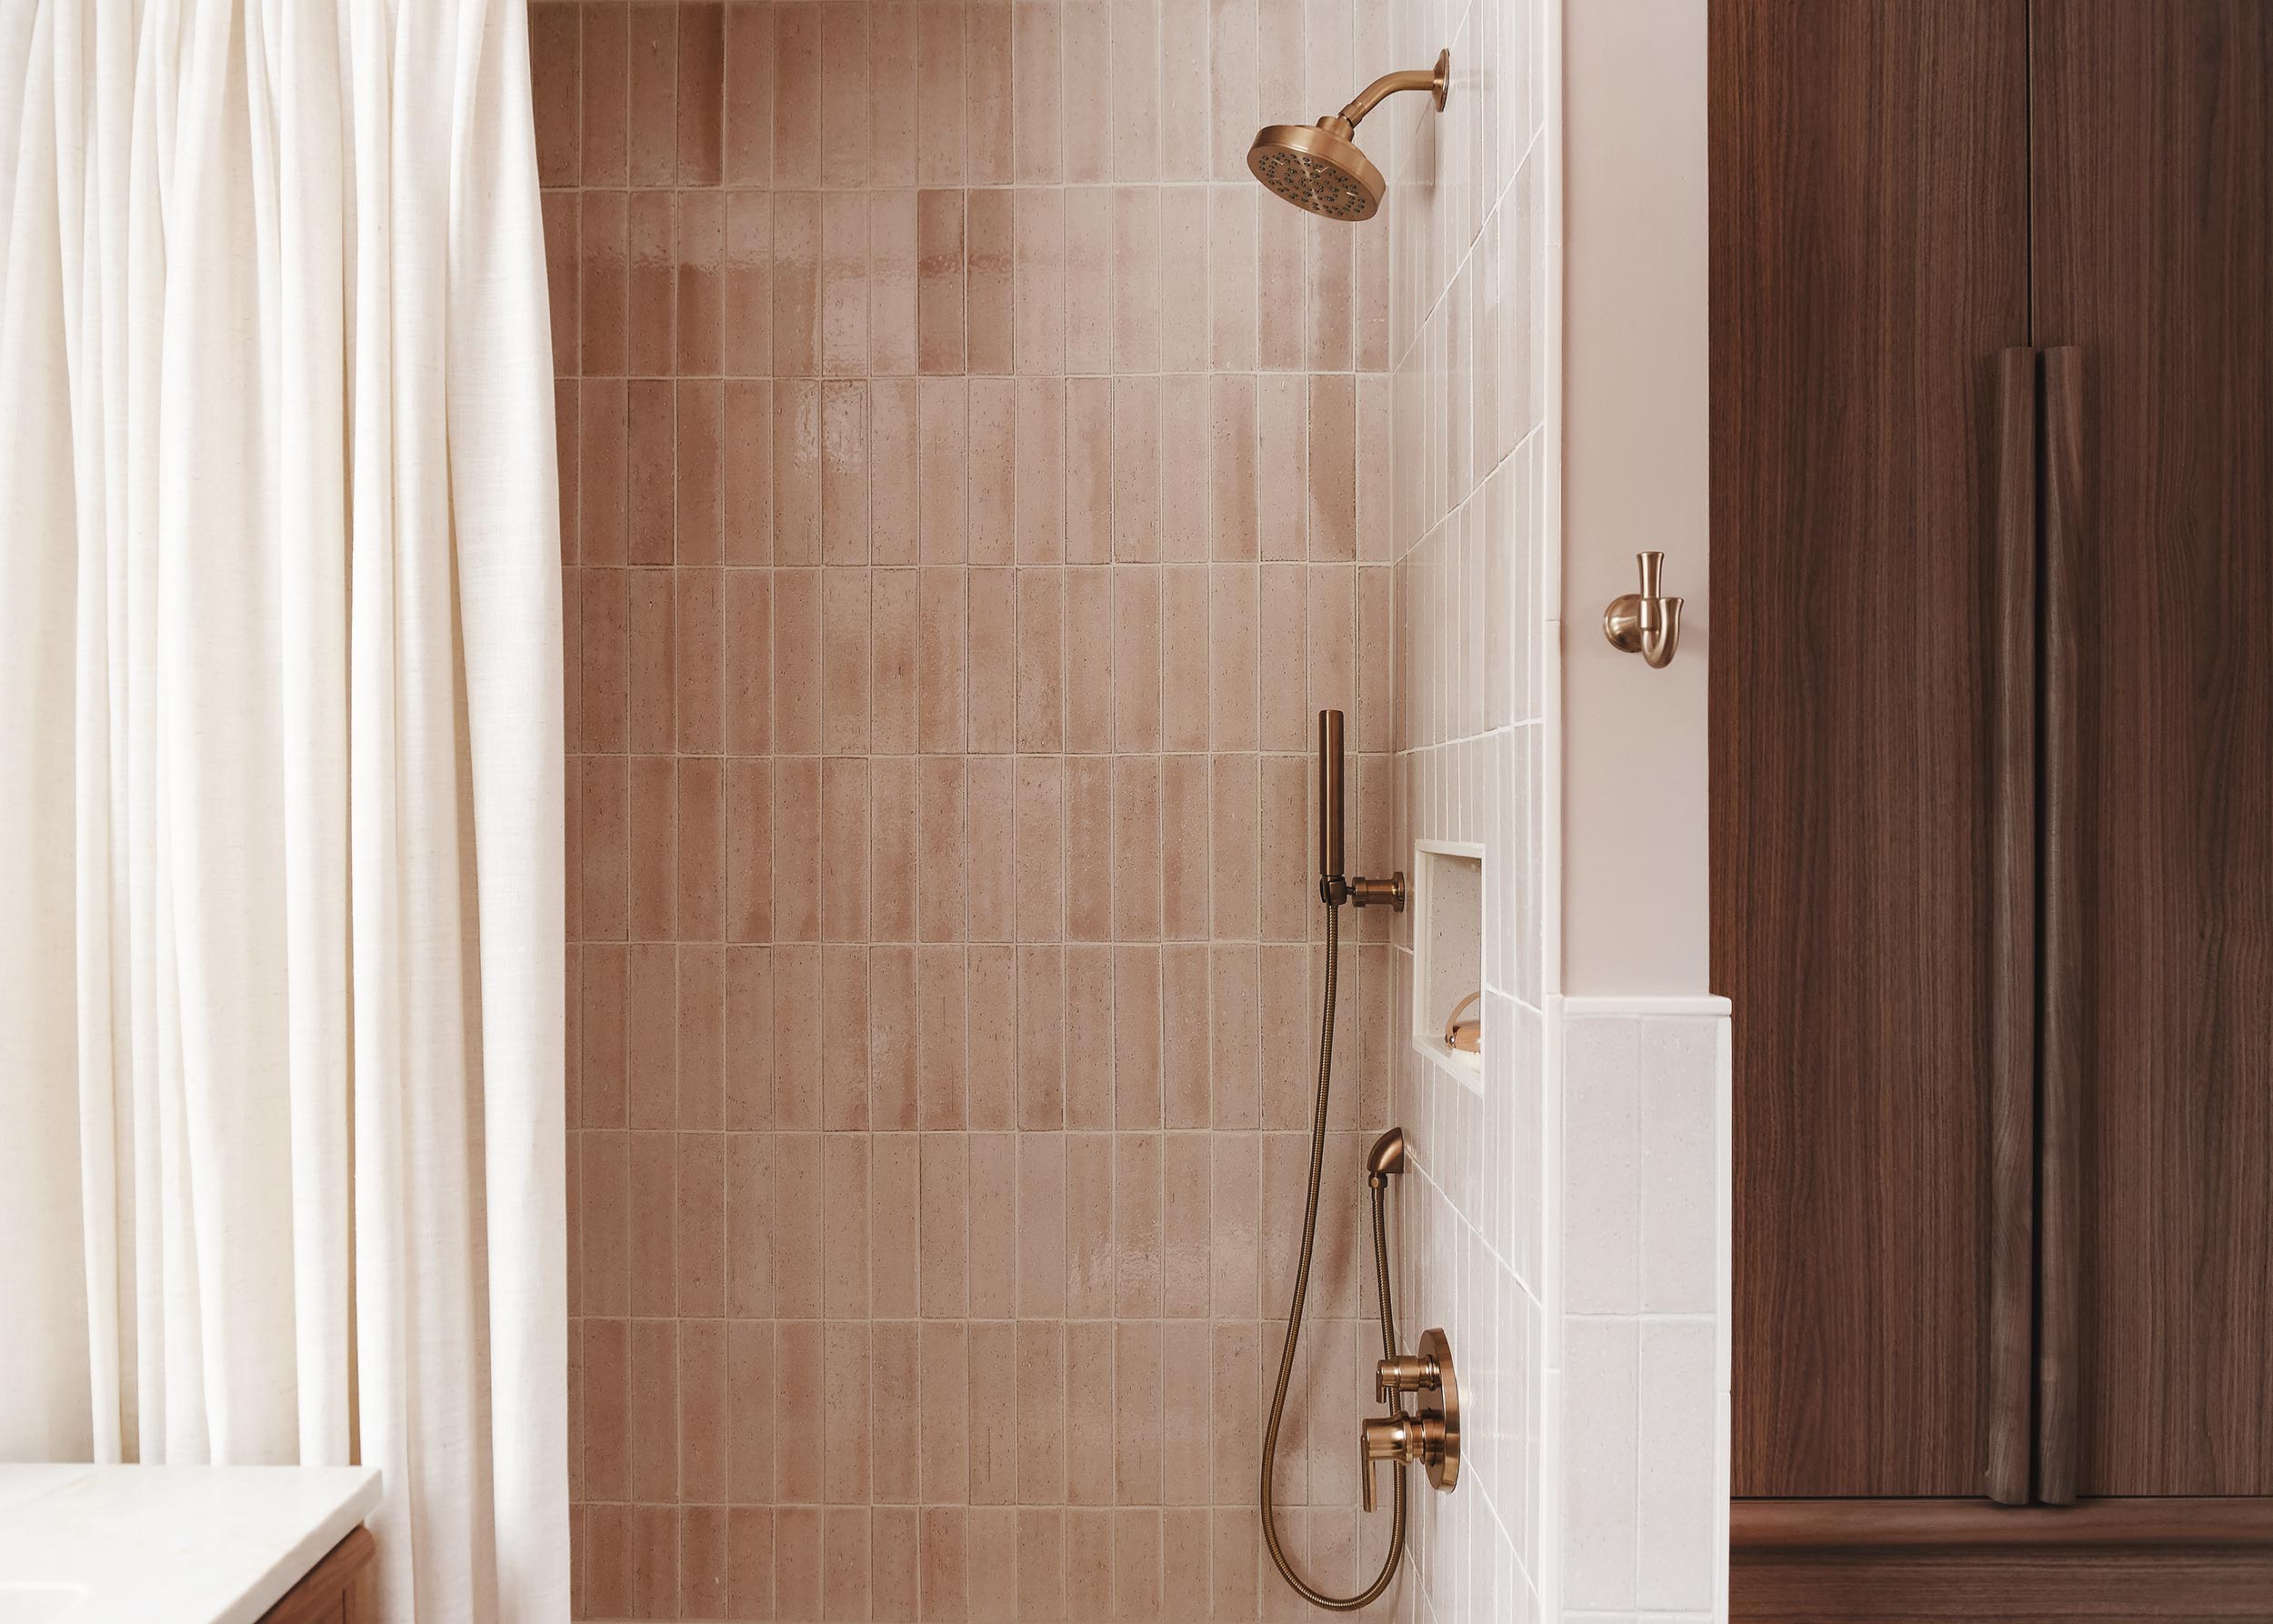 A peek into the shower with pink tile, cream shower curtain and walnut cabinetry | via Yellow Brick Home